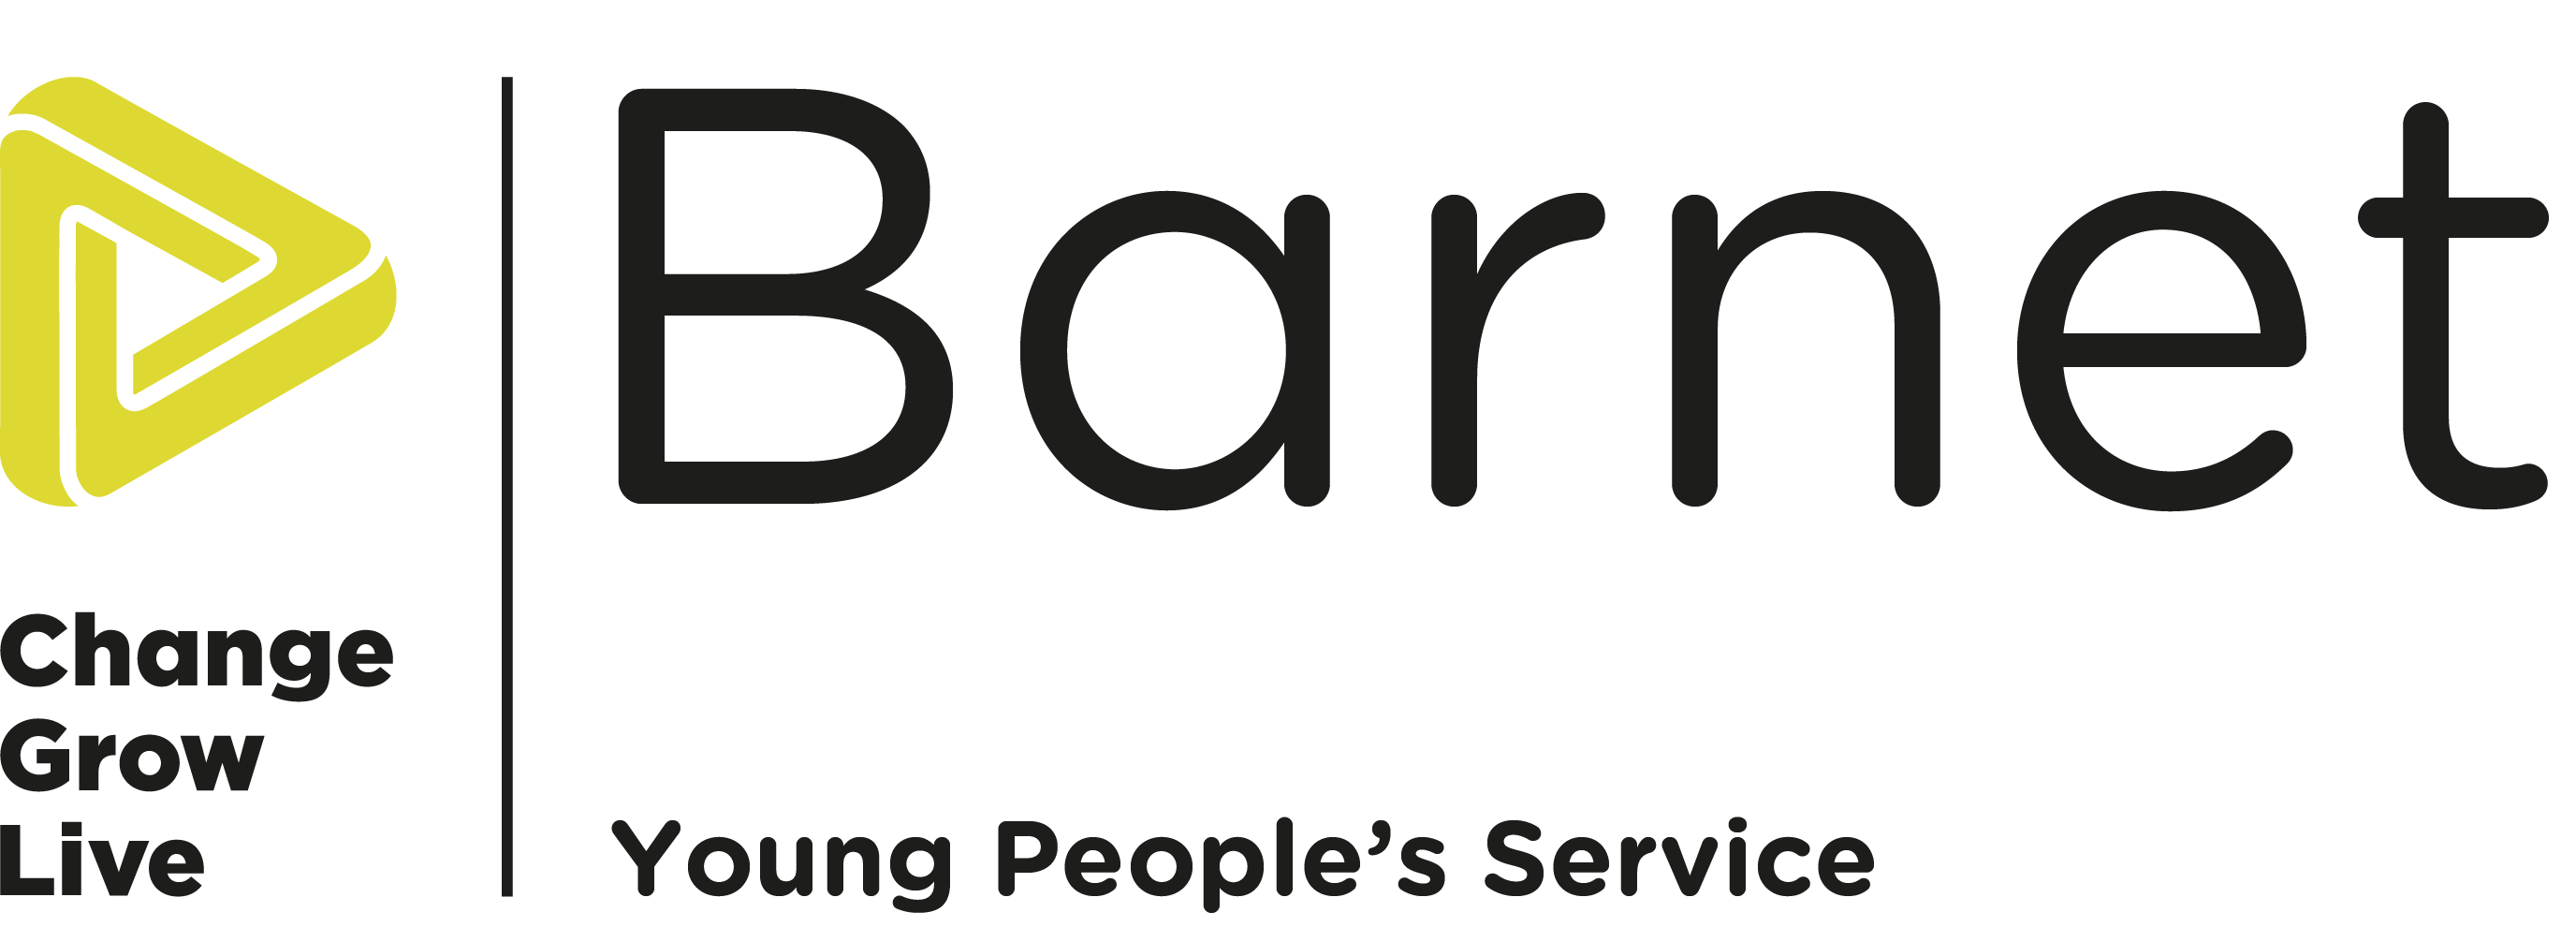 The Barnet young people's service logo in colour